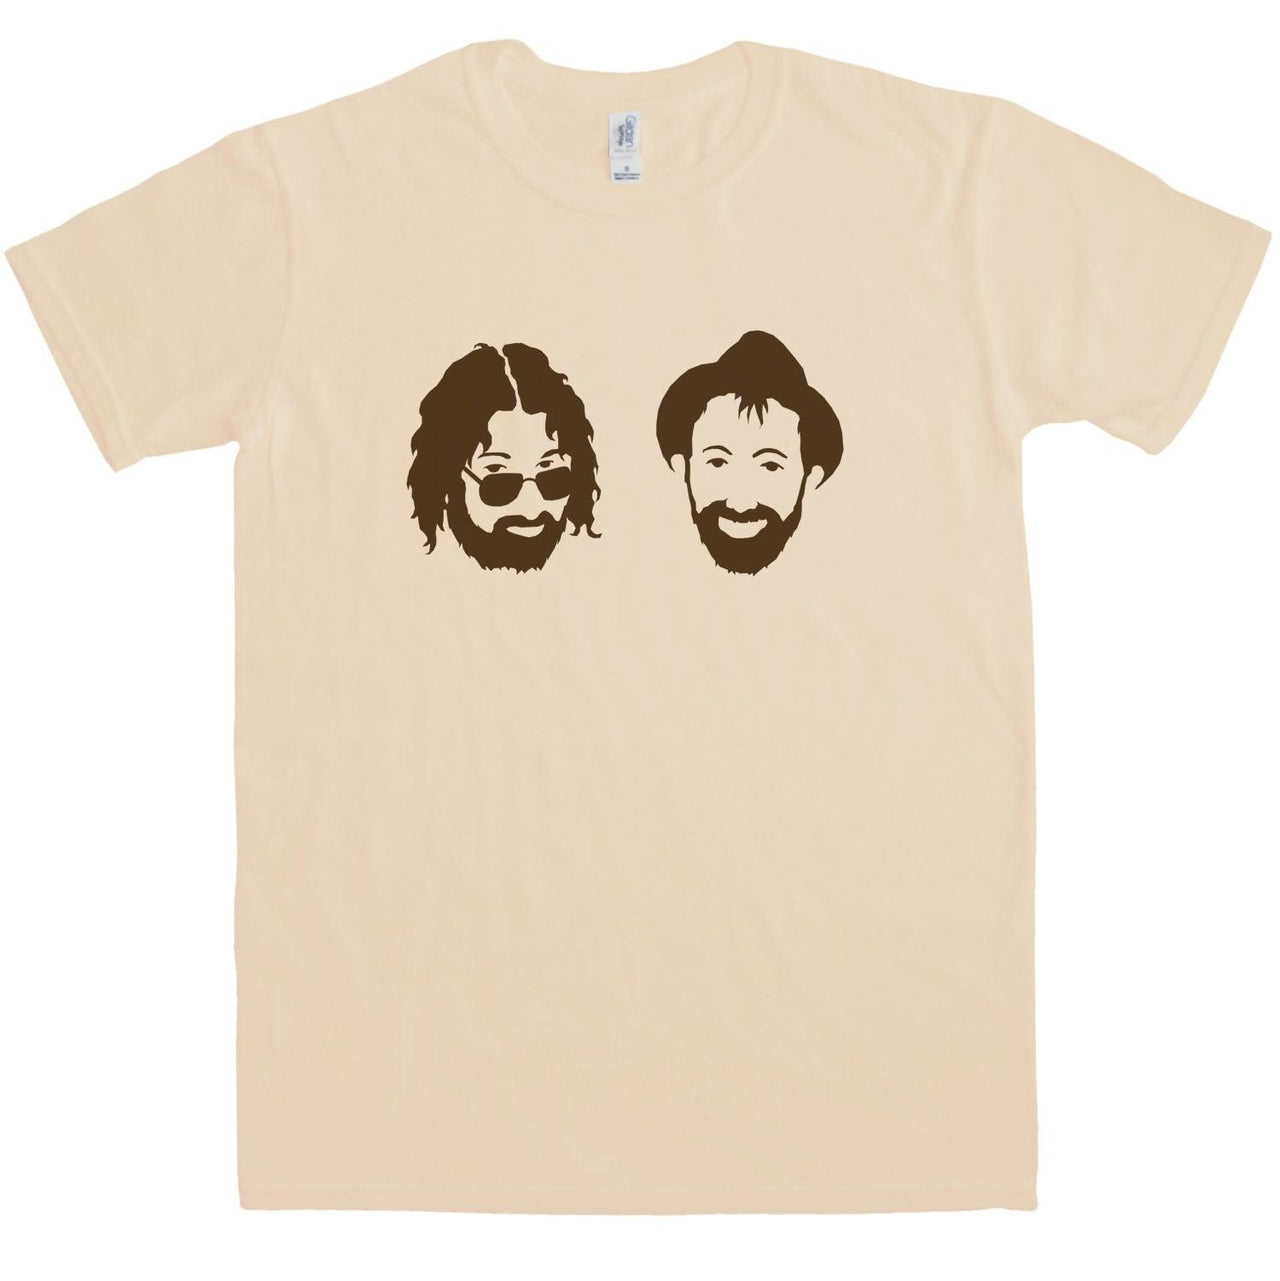 Beards Glasses And Hat Unisex T-Shirt, Inspired By Chas N Dave 8Ball